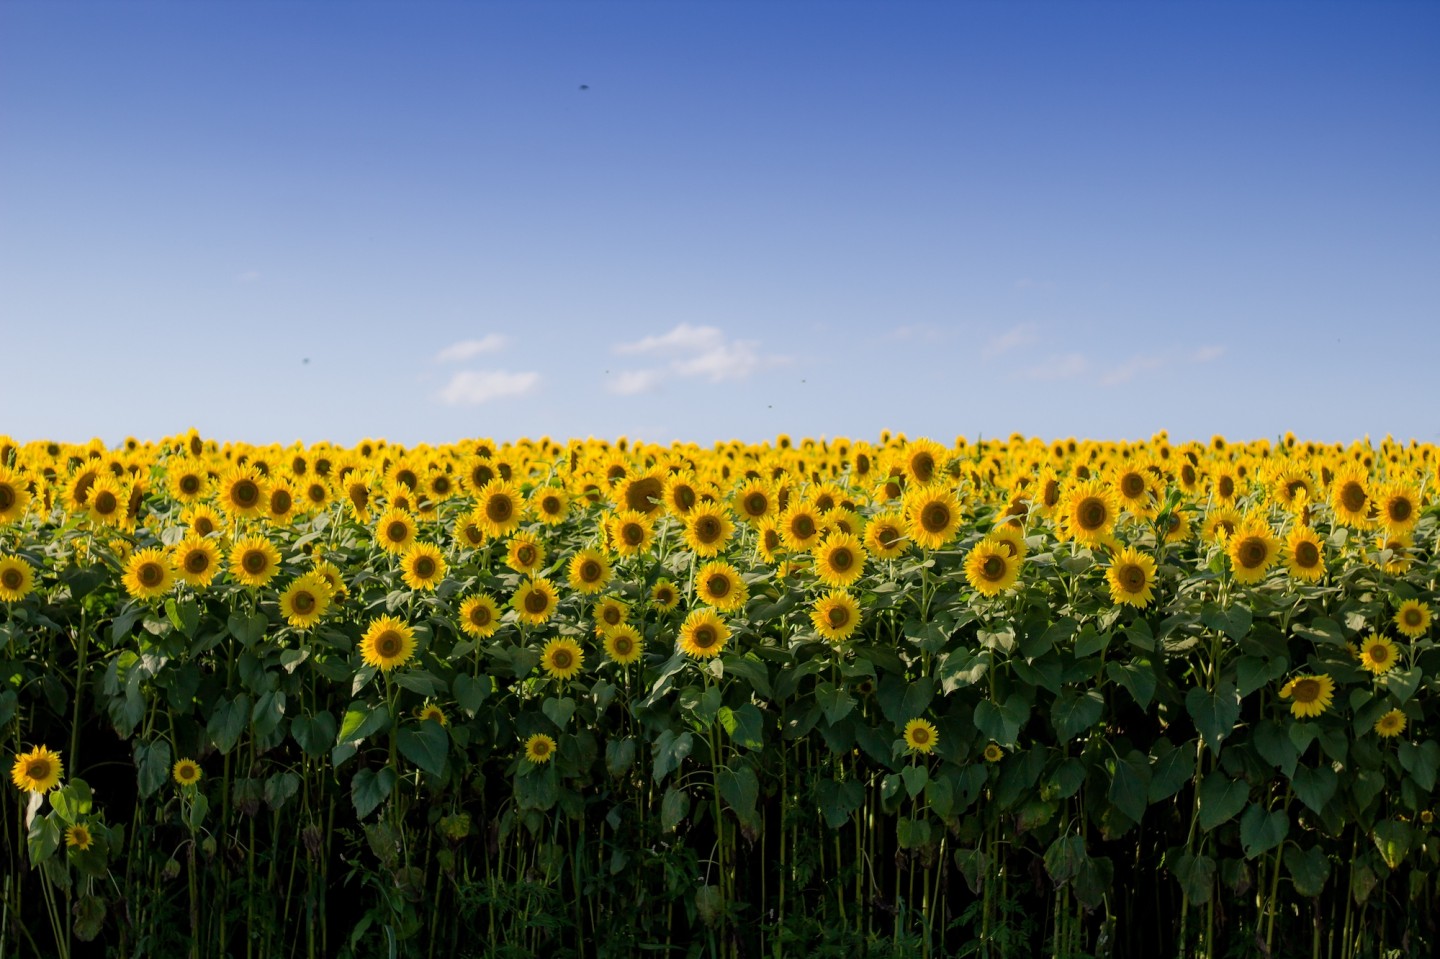 Beautiful sunflower field with a clear blue sky in the background